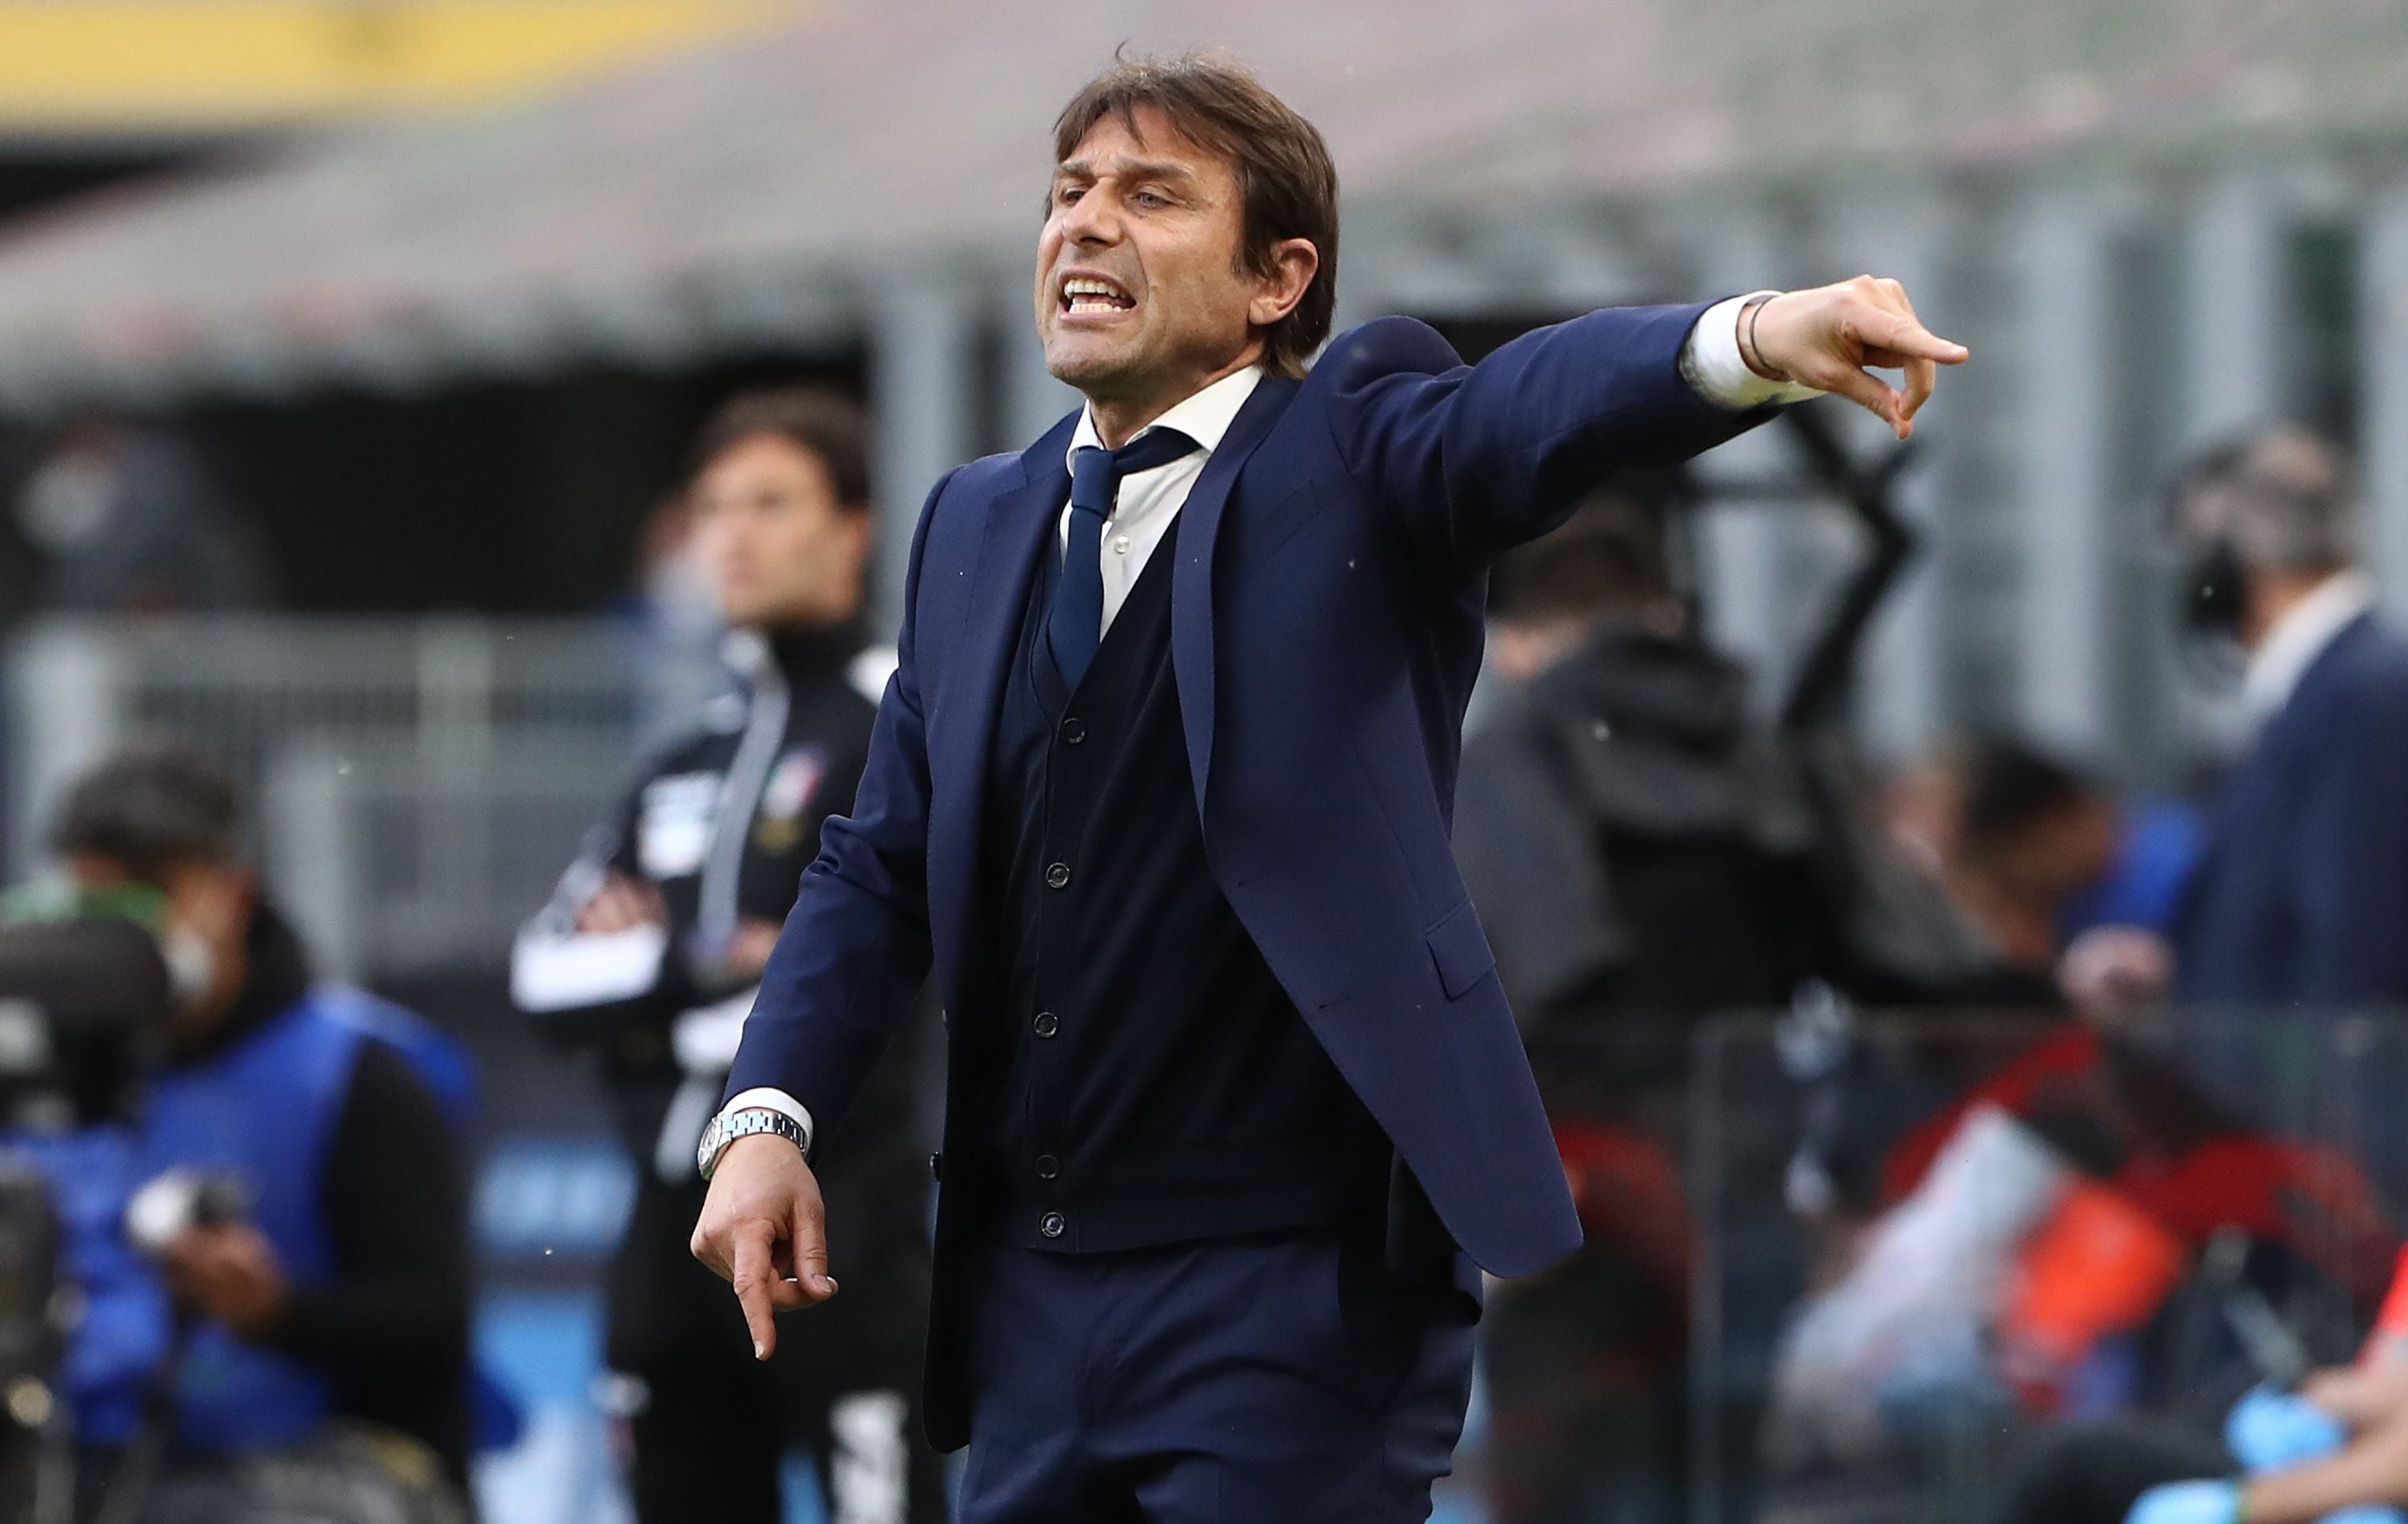 Former Premier League winner Antonio Conte is among those being linked with the job